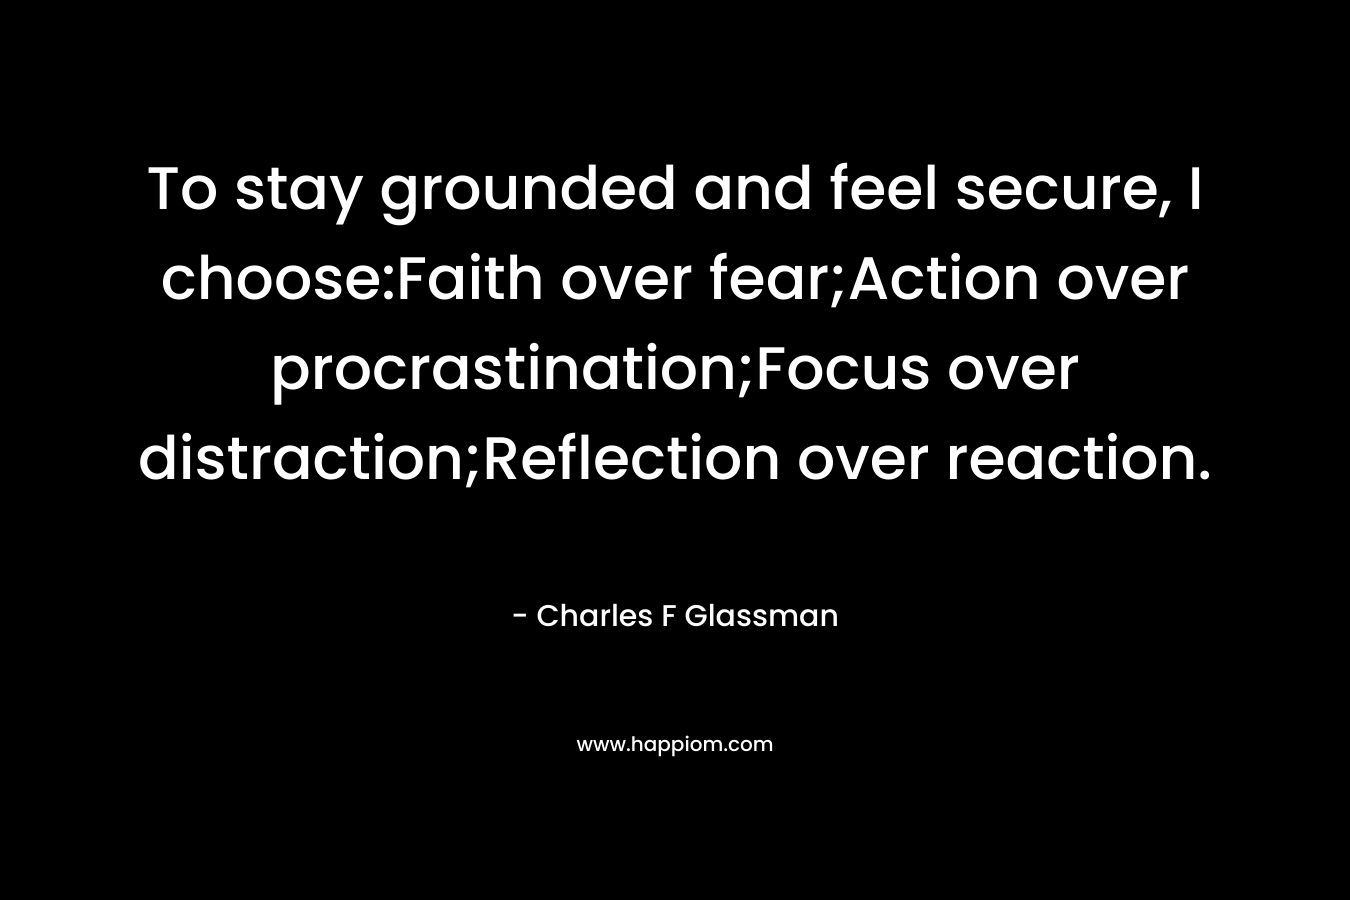 To stay grounded and feel secure, I choose:Faith over fear;Action over procrastination;Focus over distraction;Reflection over reaction. – Charles F Glassman